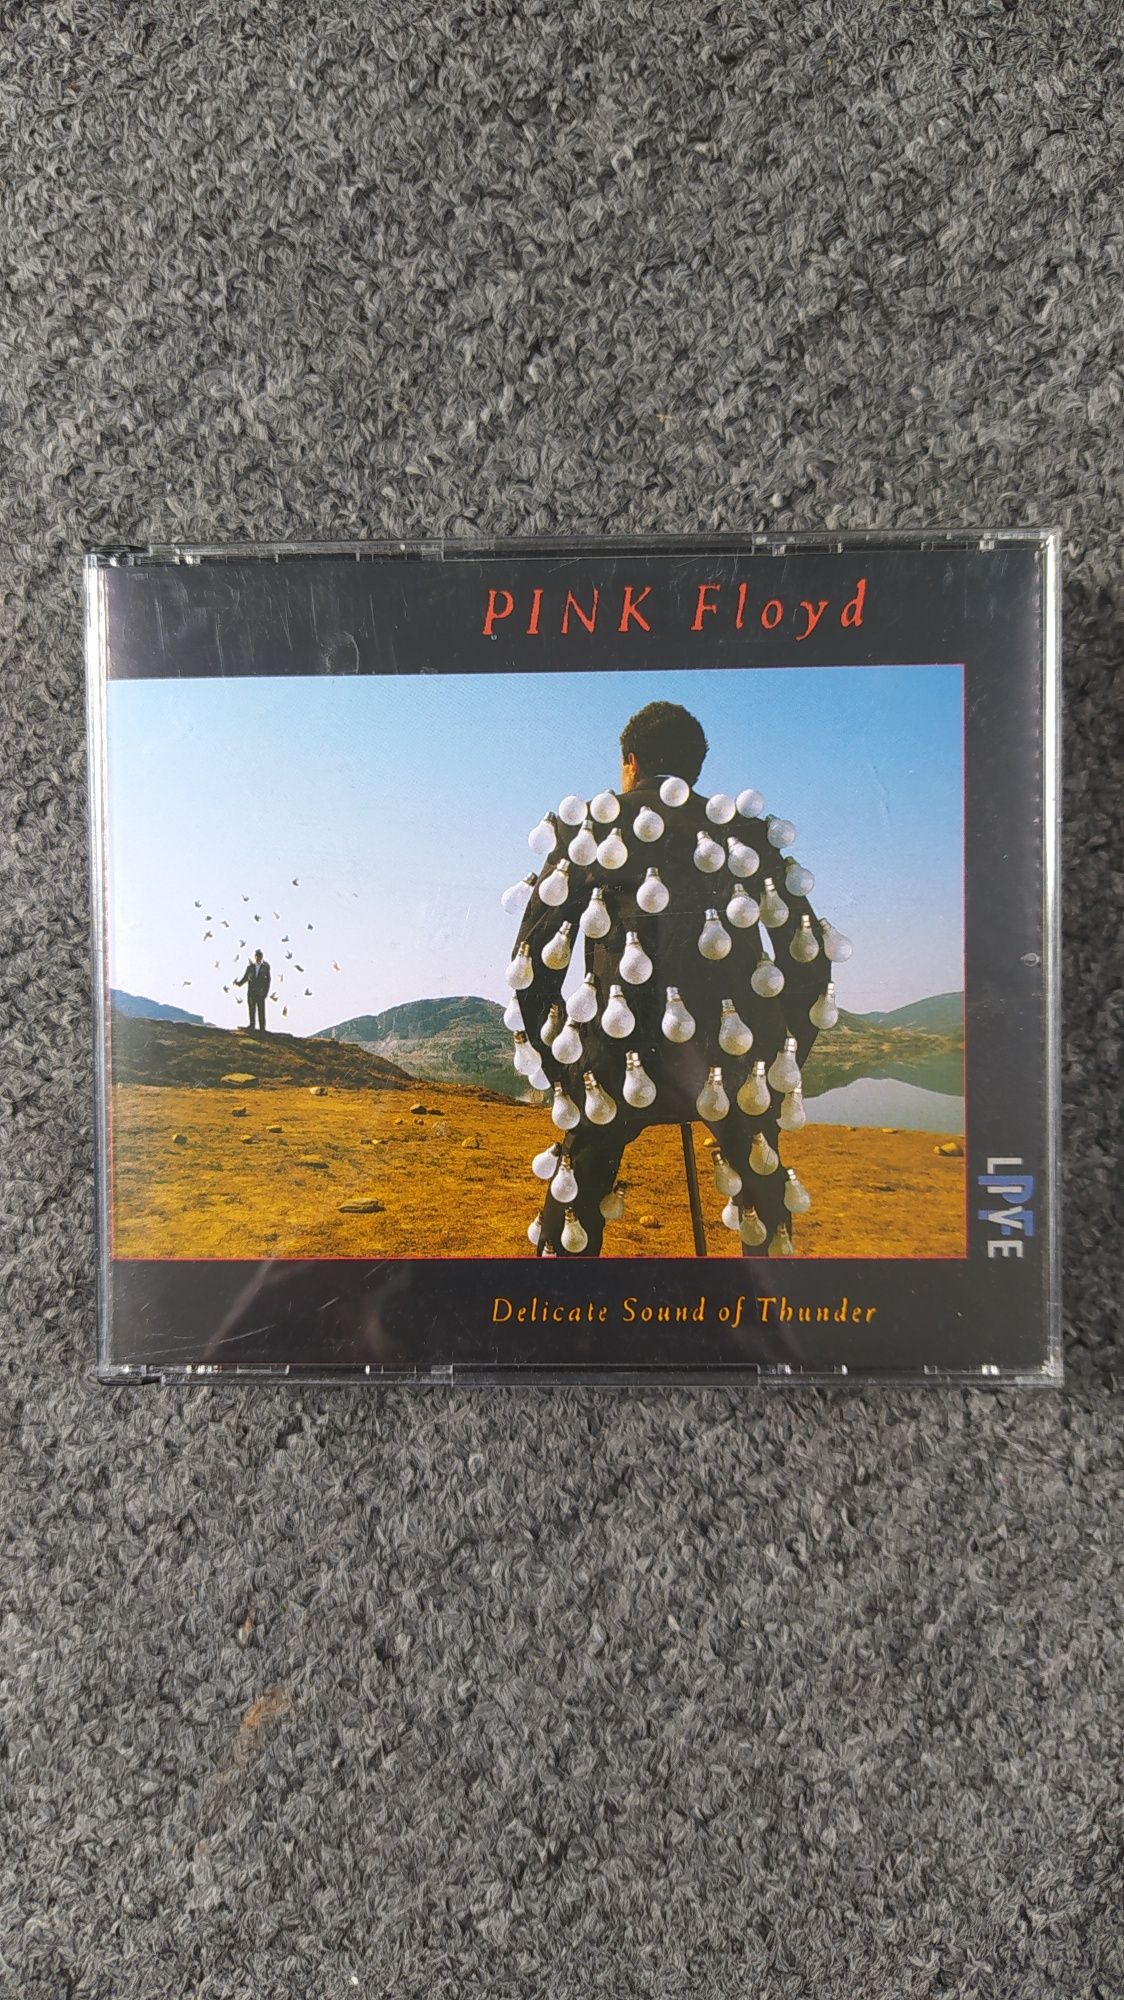 PINK FLOYD A Delicate Sound of Thunder 2CD